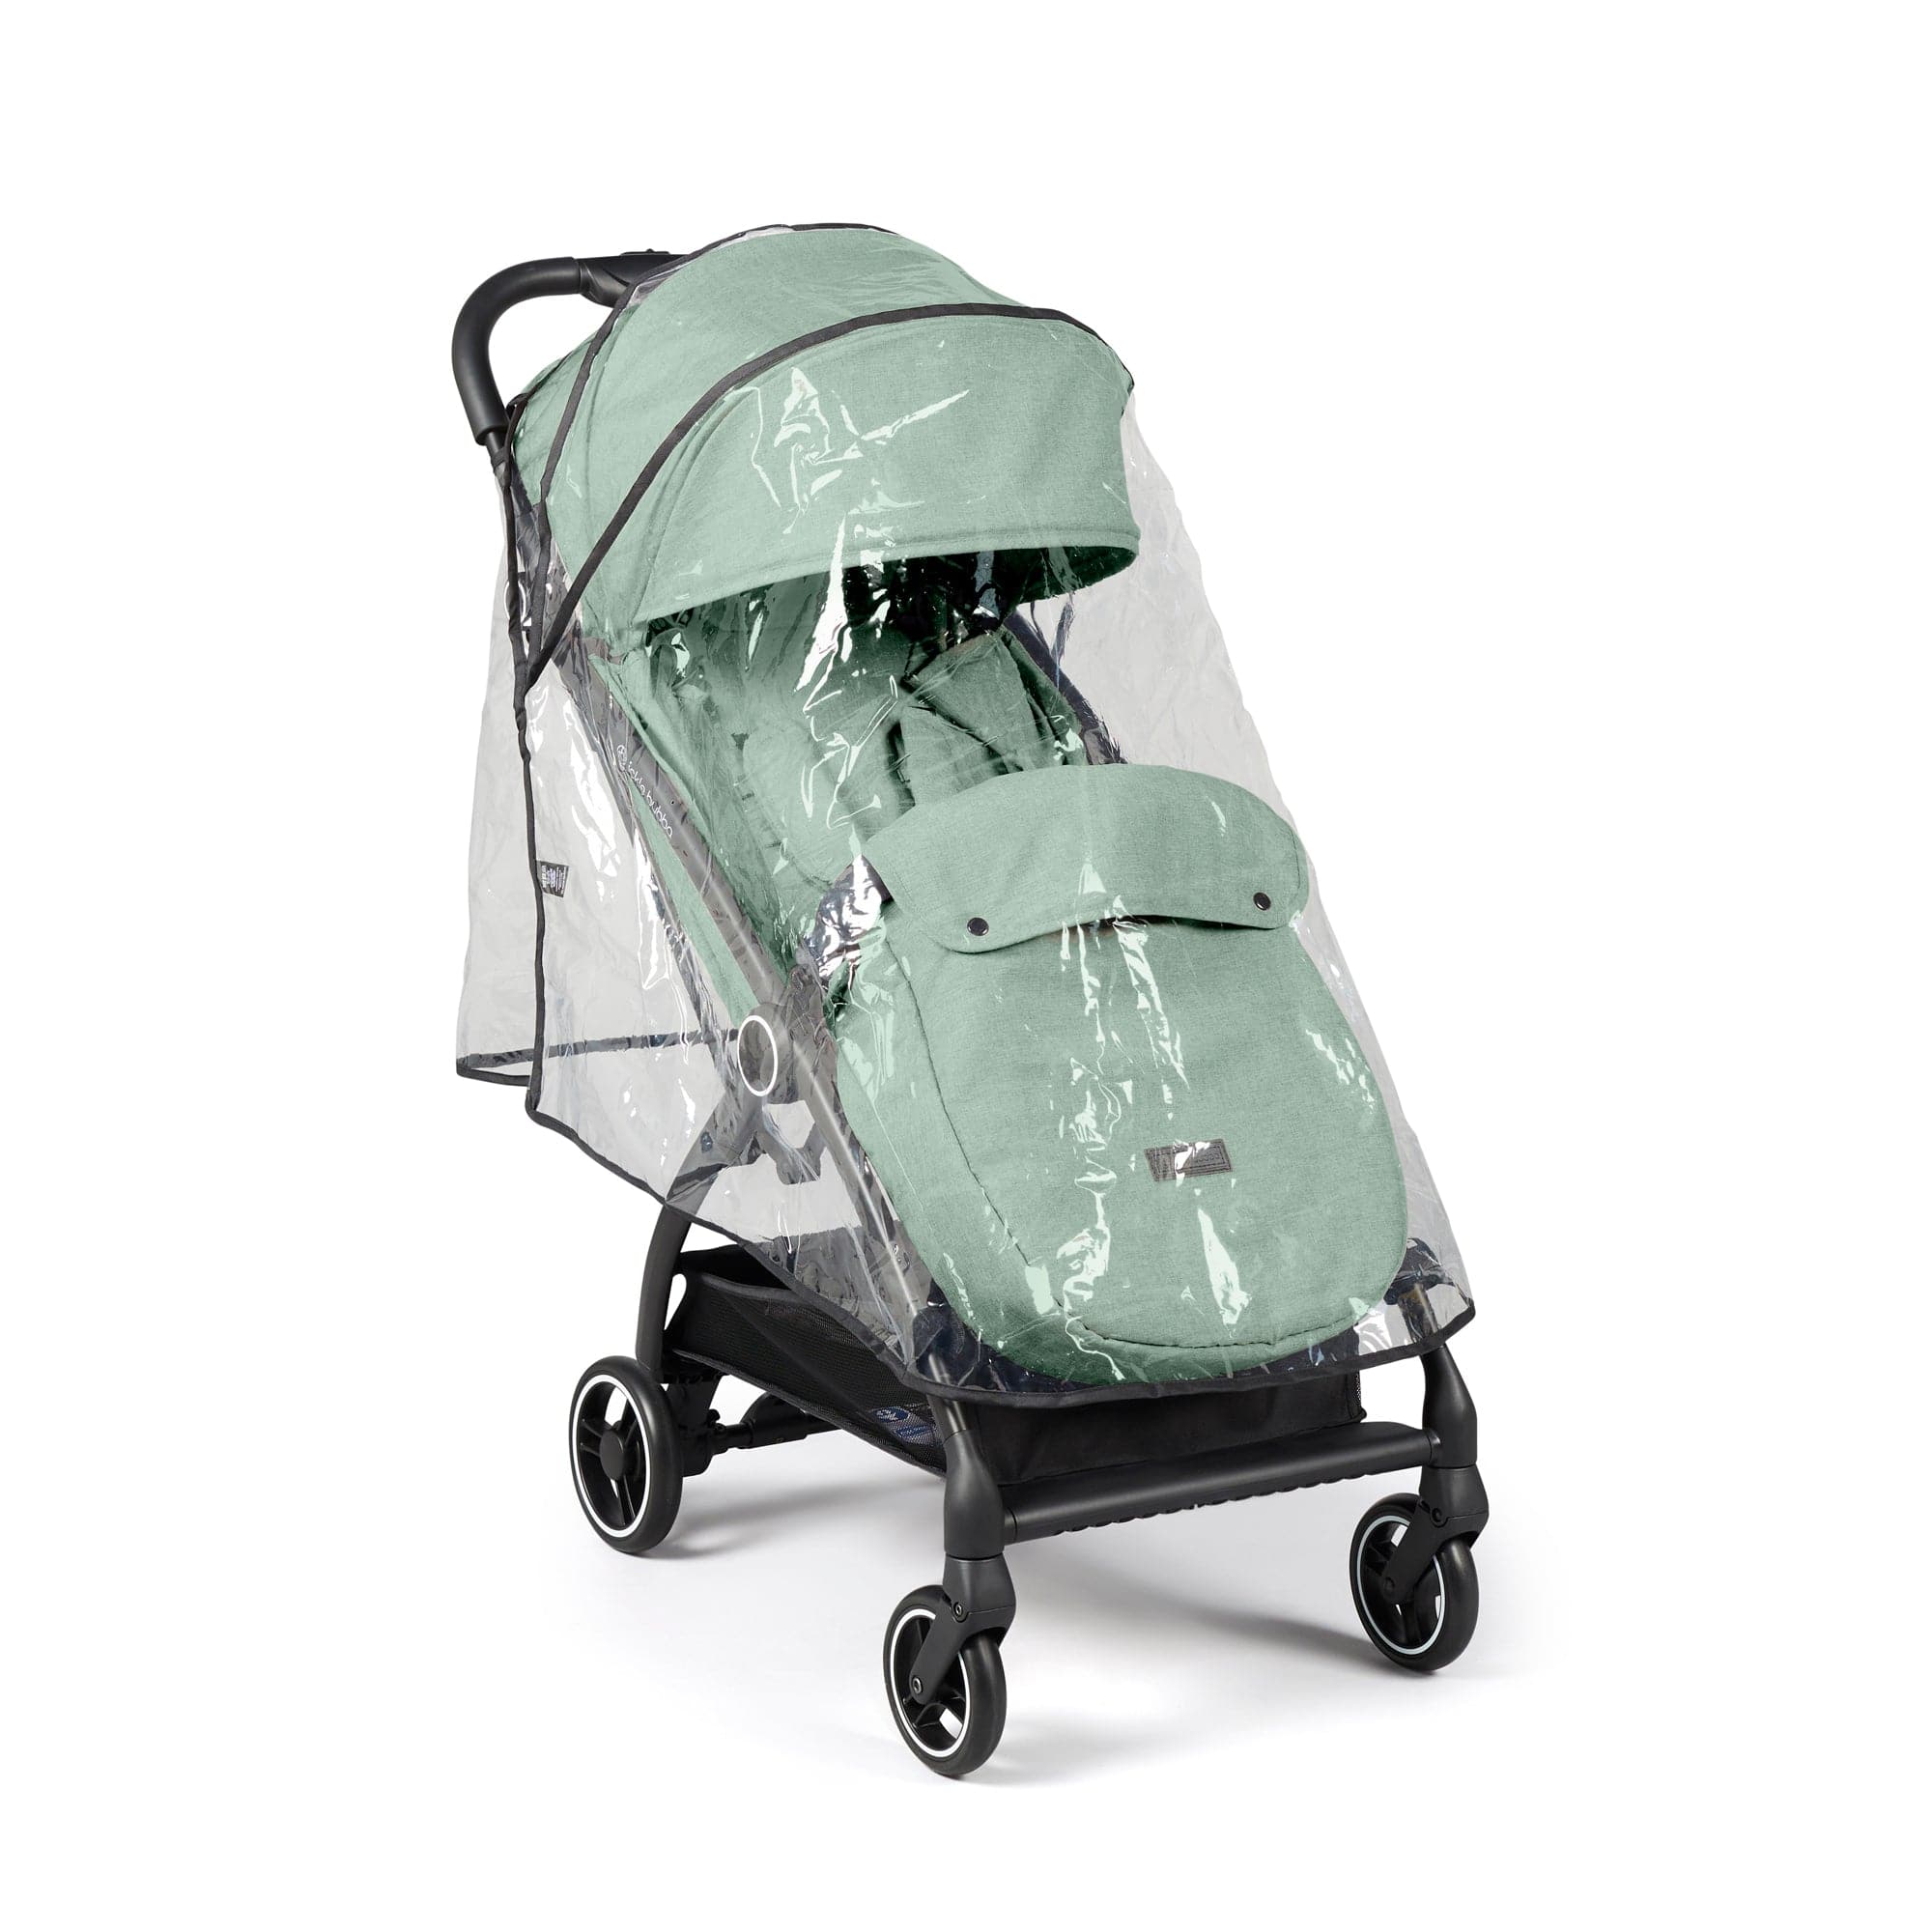 Ickle Bubba baby pushchairs Ickle Bubba Aries Autofold Stroller in Sage Green 15-005-100-152